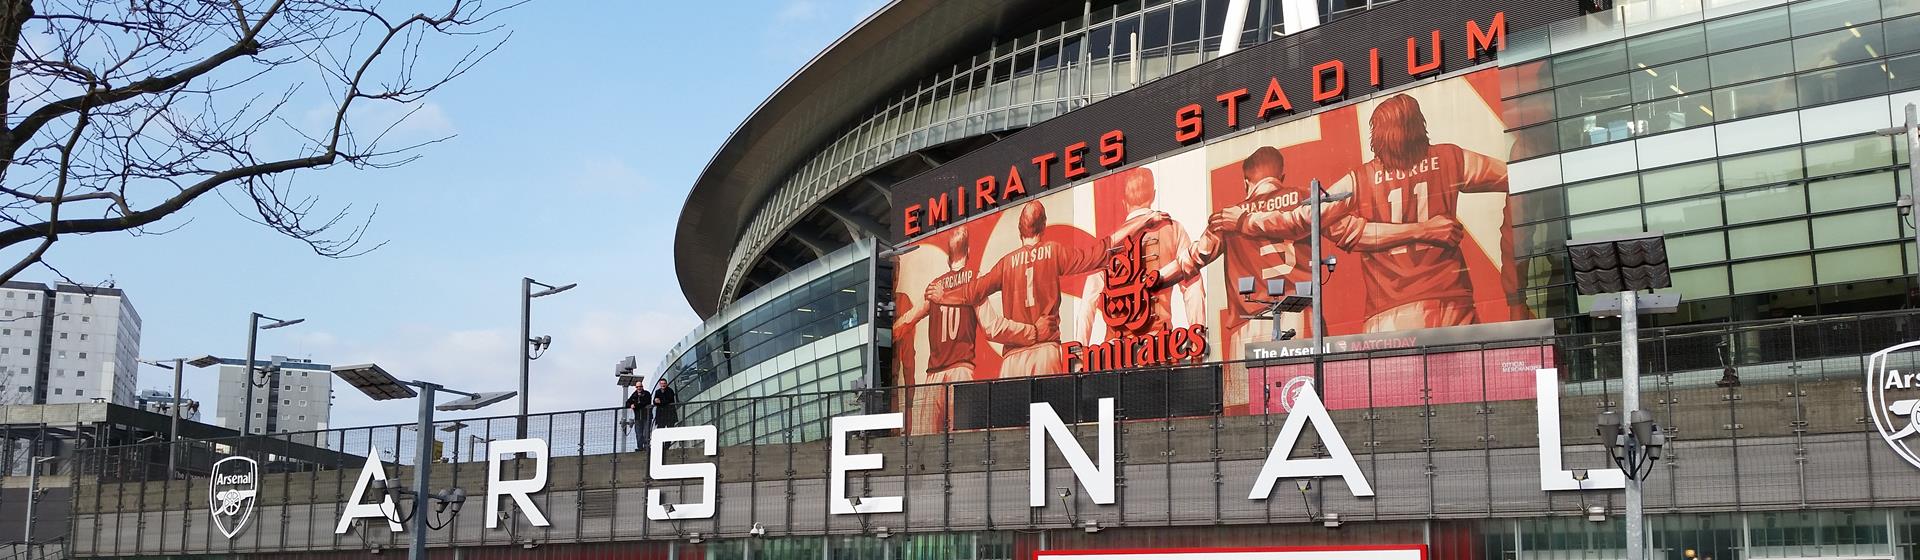 Arsenal Match Packages